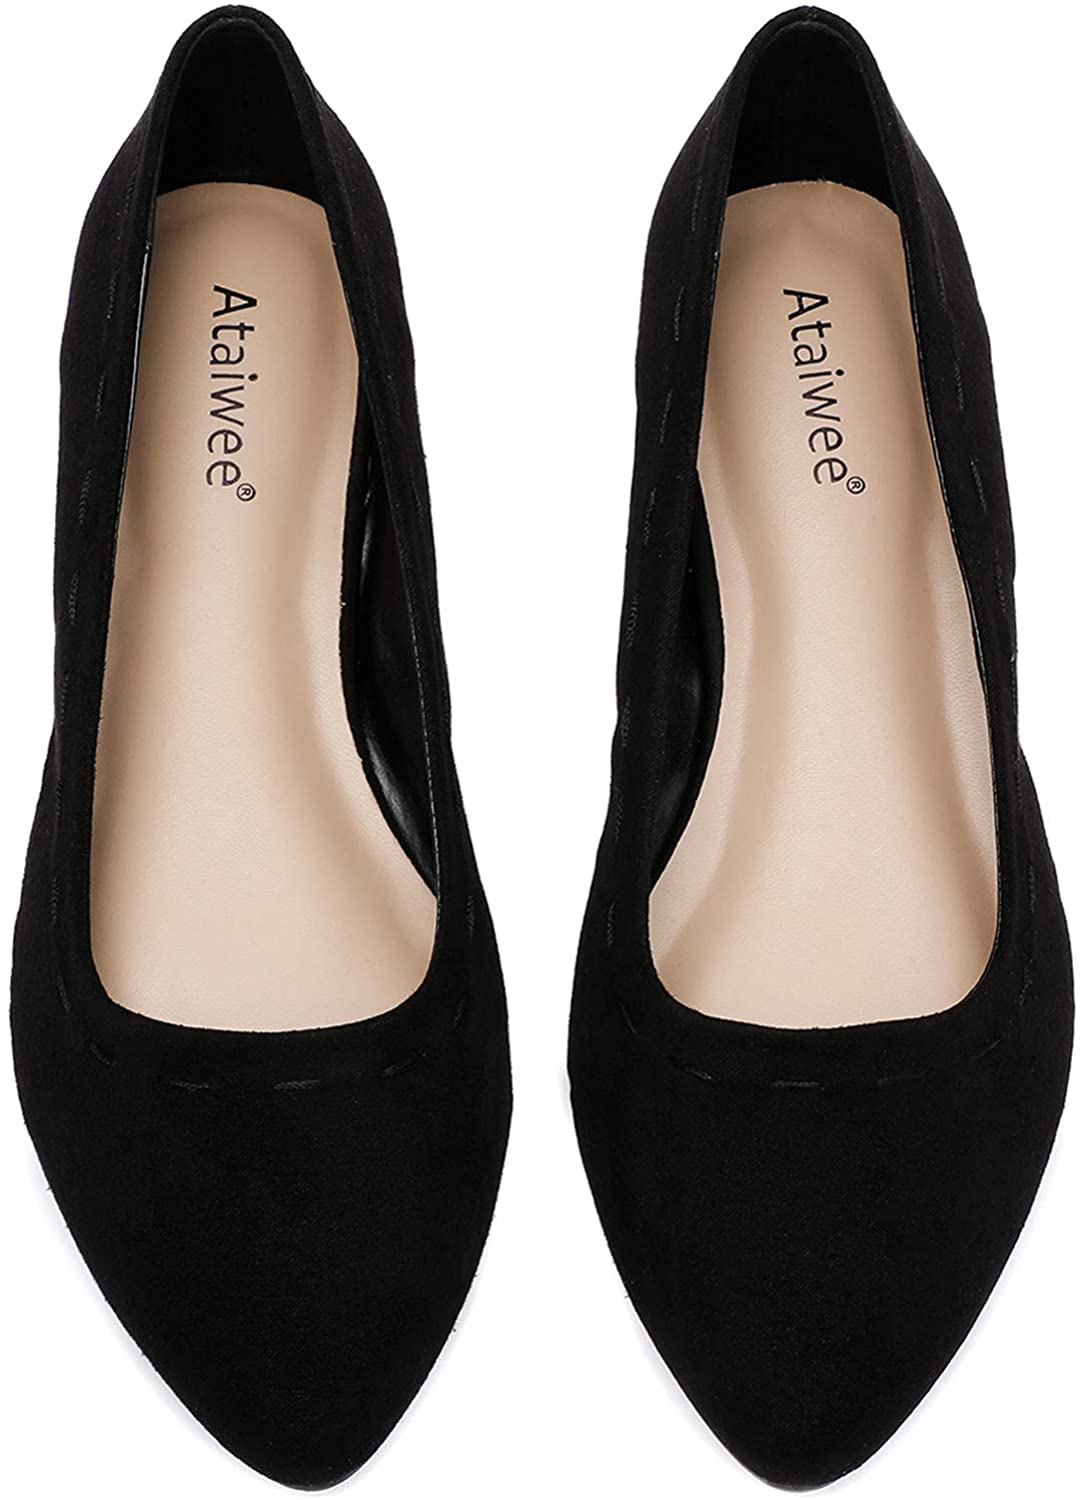 Black Round Toe Slip on Shoes. Ataiwee Women's Wide Width Flat Shoes 